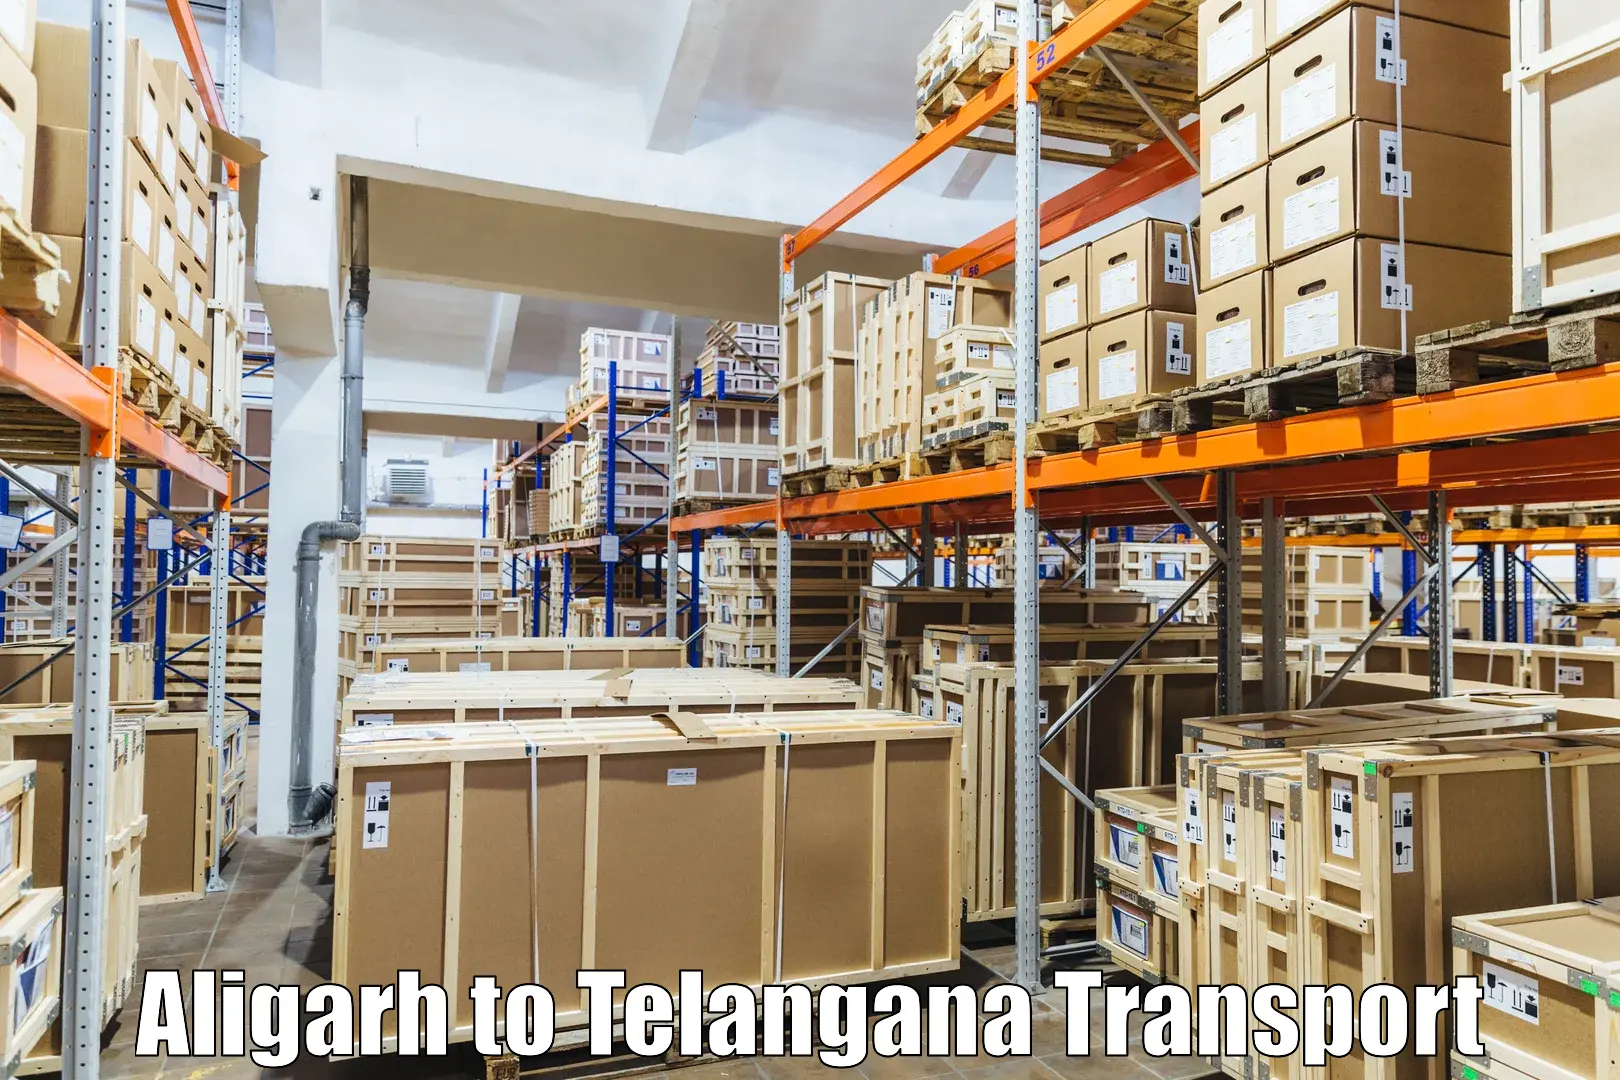 Express transport services in Aligarh to Amangal